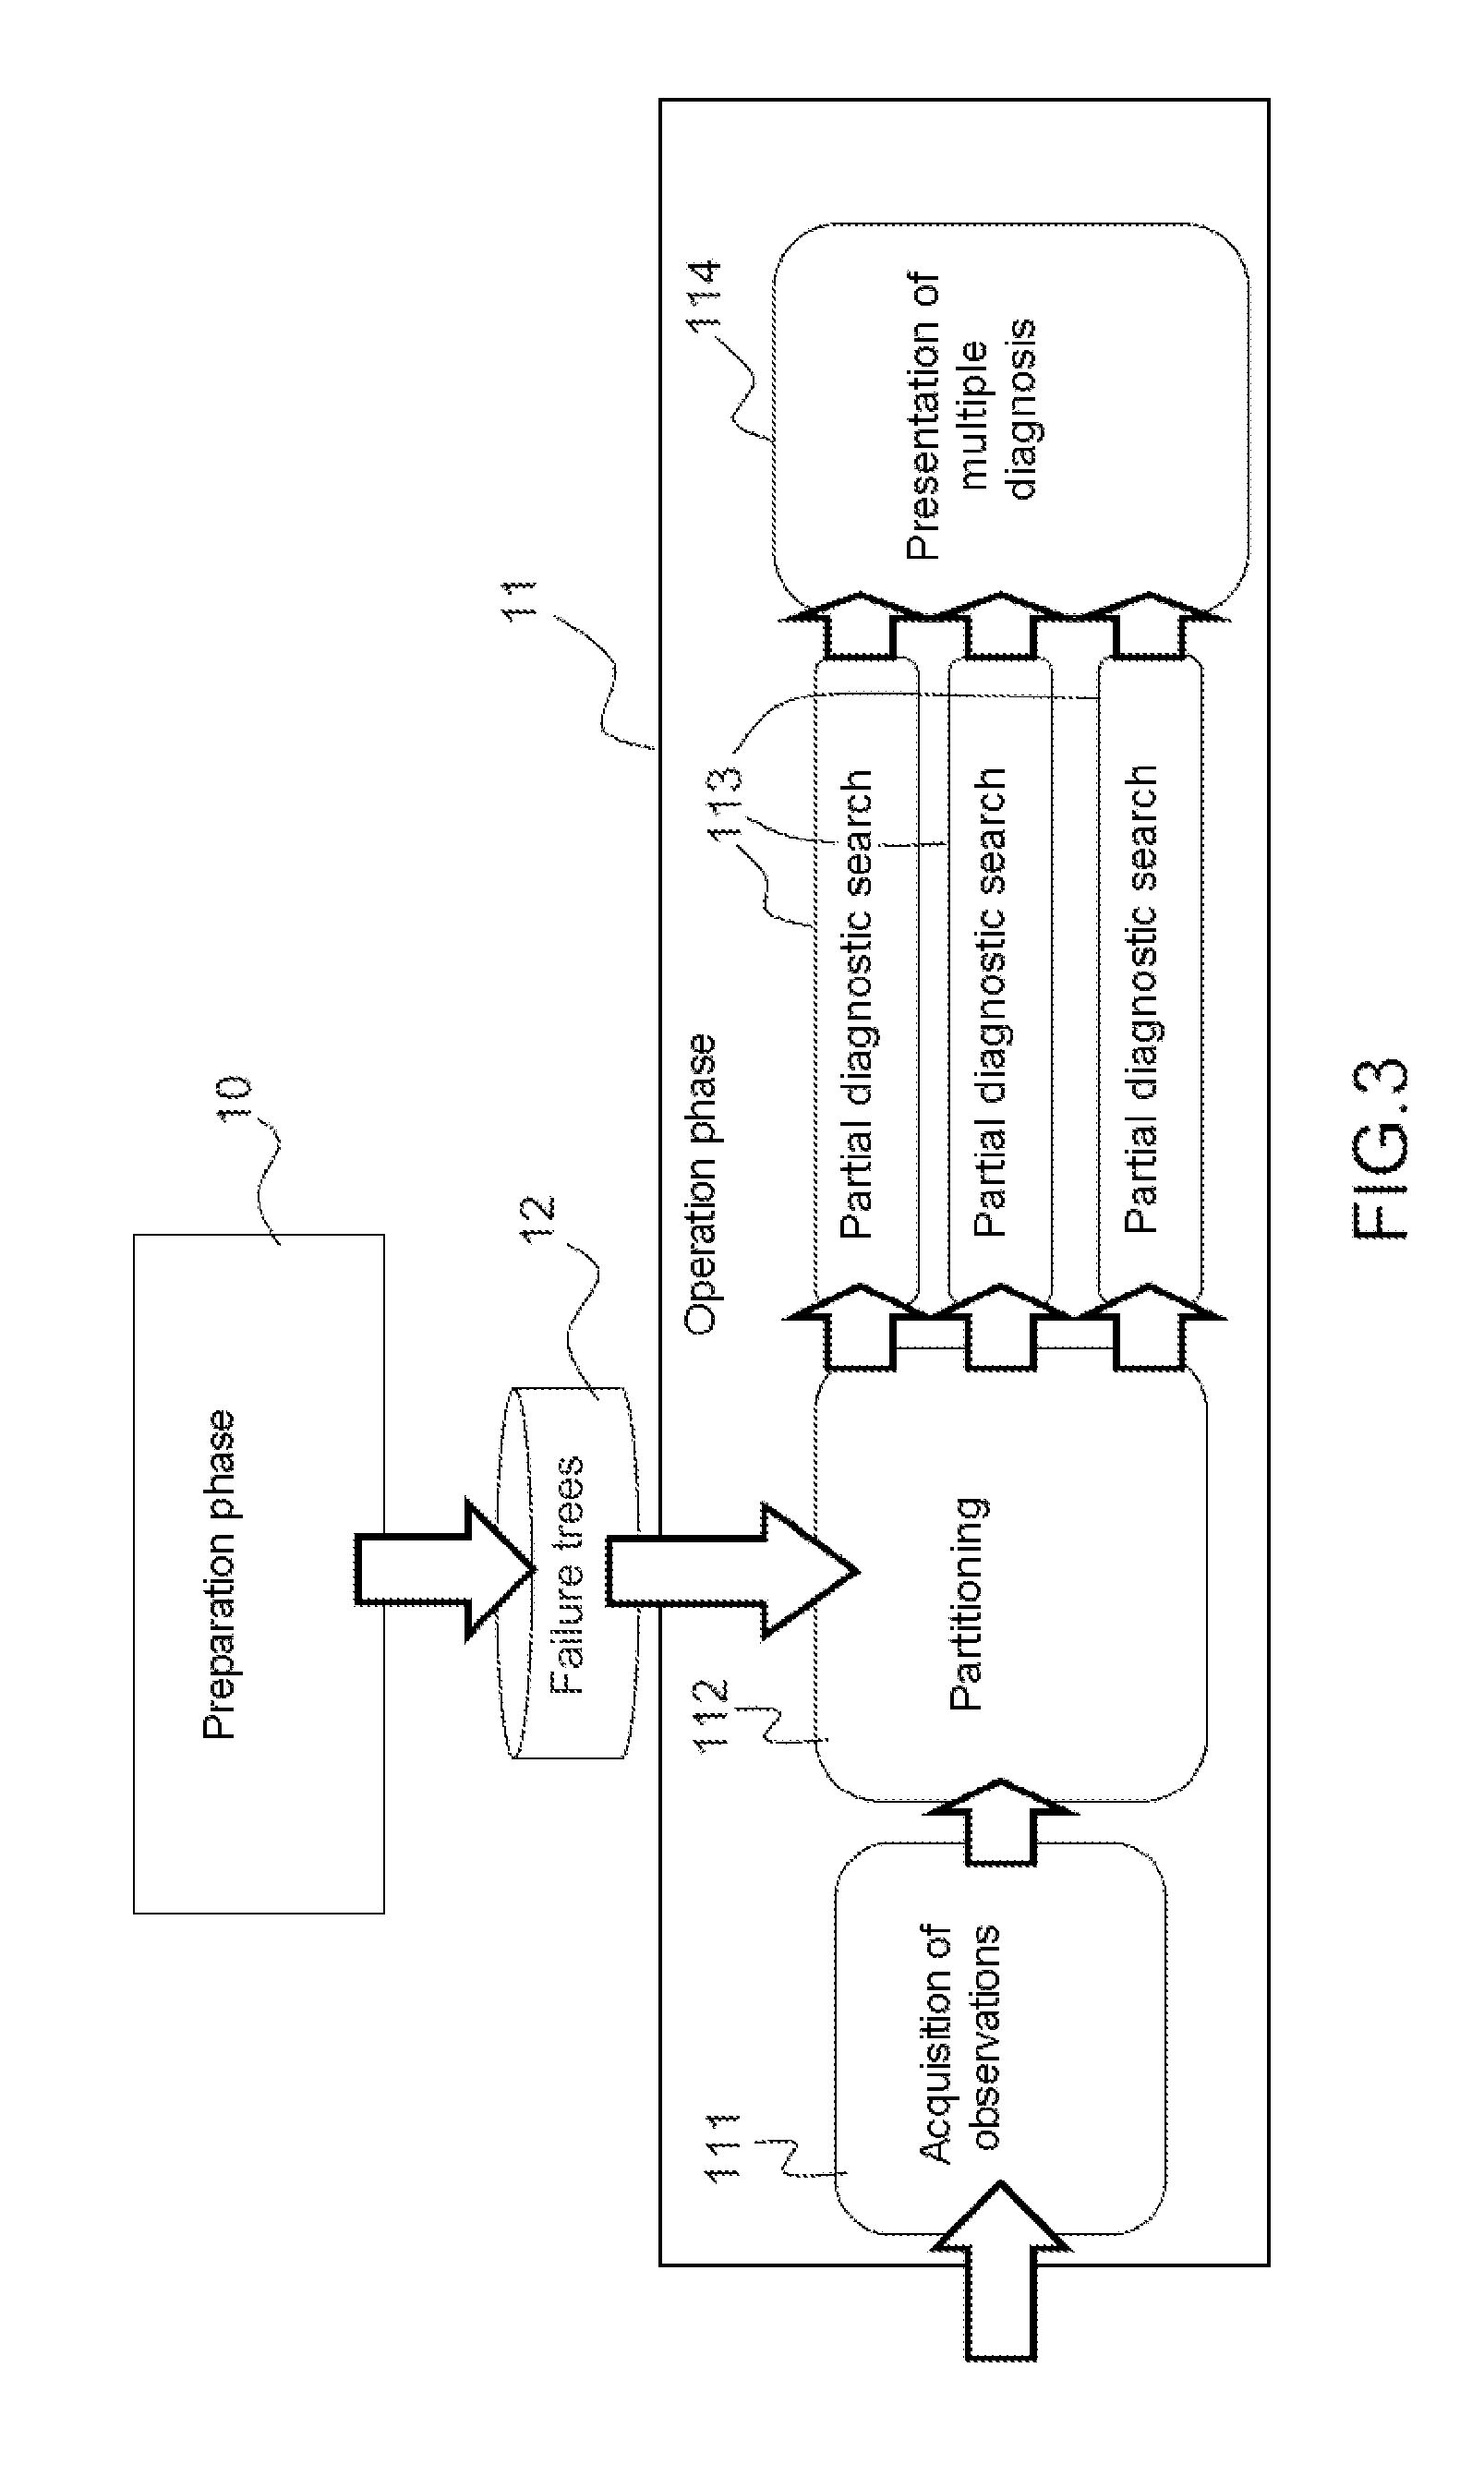 Method and Device for Determining Diagnoses